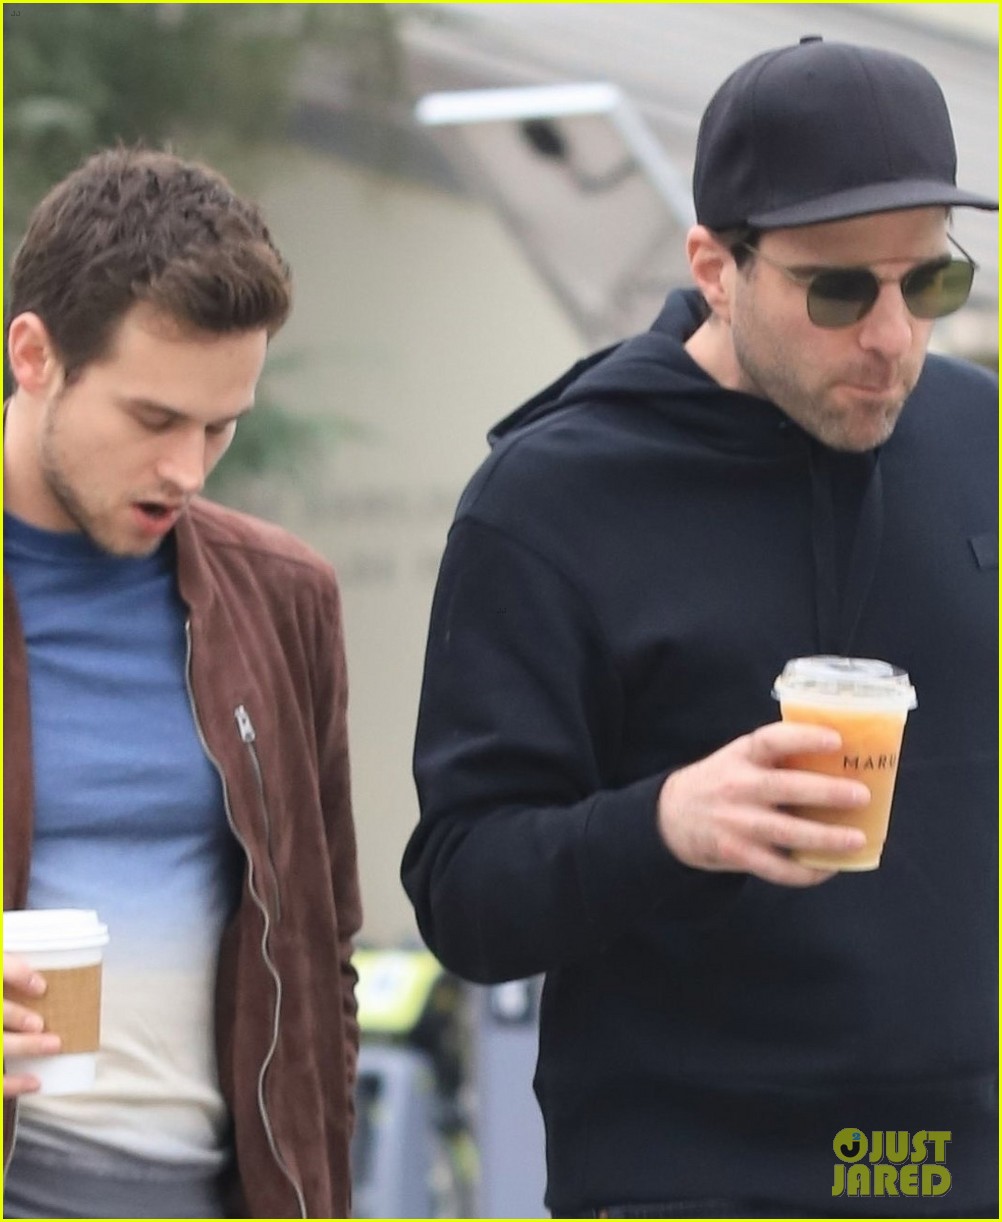 Richard Madden & Brandon Flynn | Relationship & Personal Updates /  Discussion - Page 1665 - The Lgbtq Chat